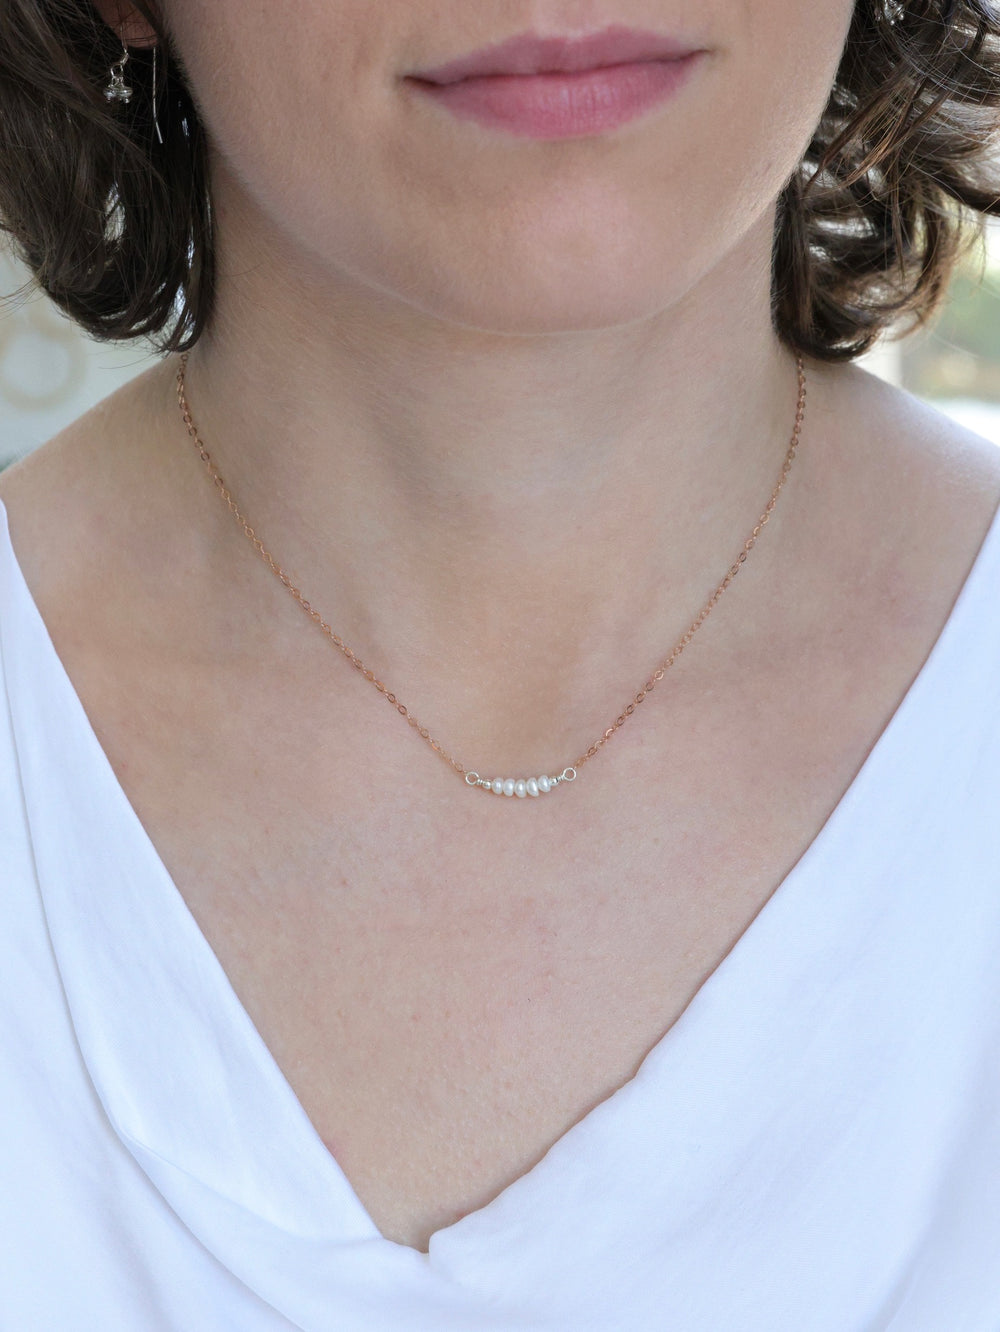 5 tiny pearls necklace